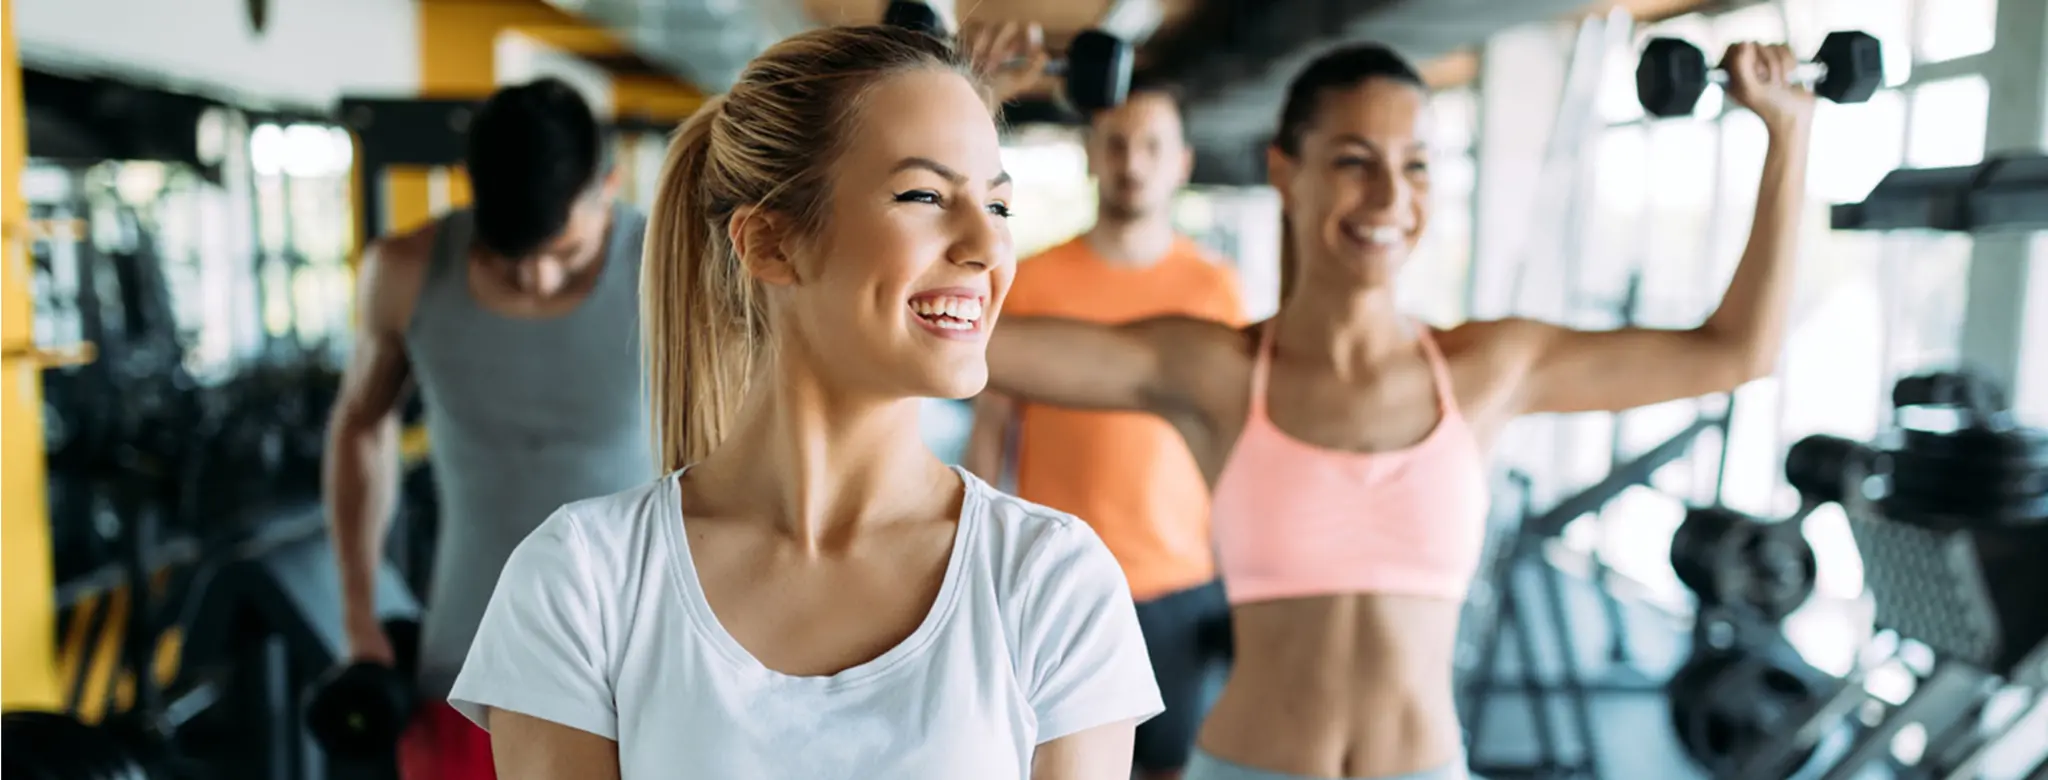 blonde woman lifting weights with others in gym